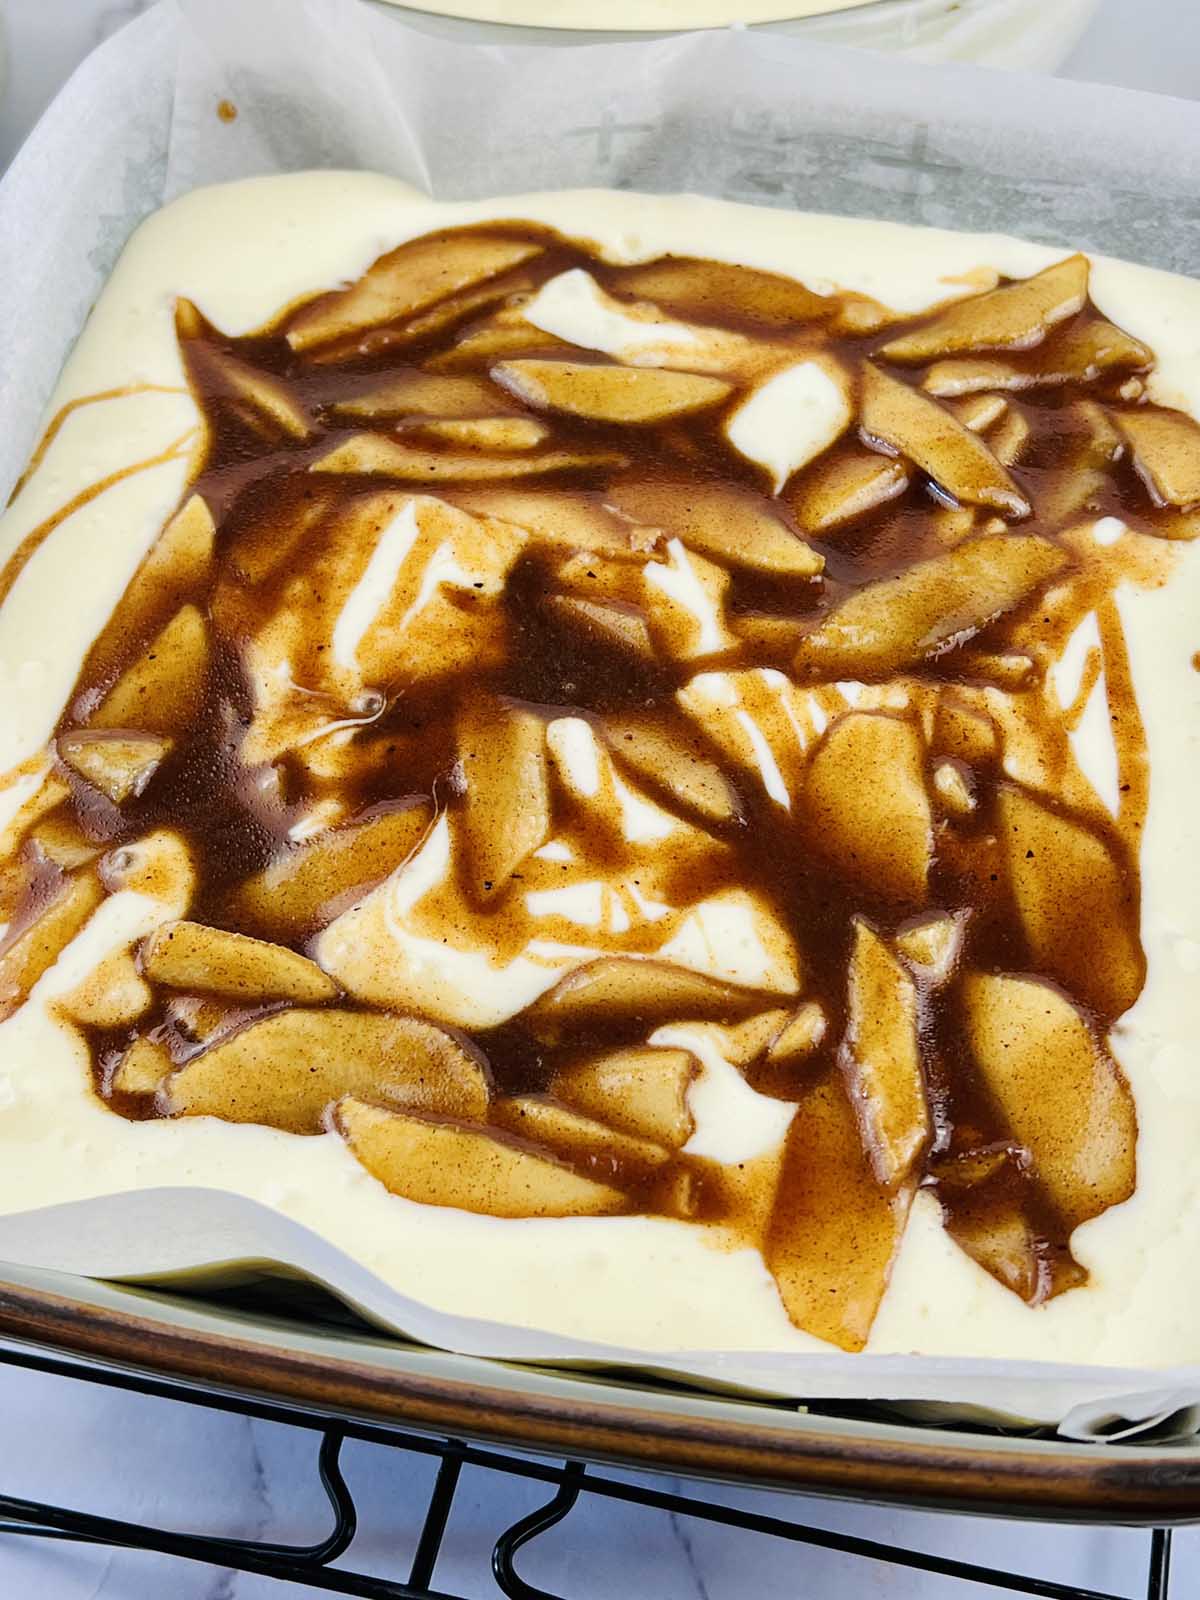 Caramelized apples over the cheesecake mixture.